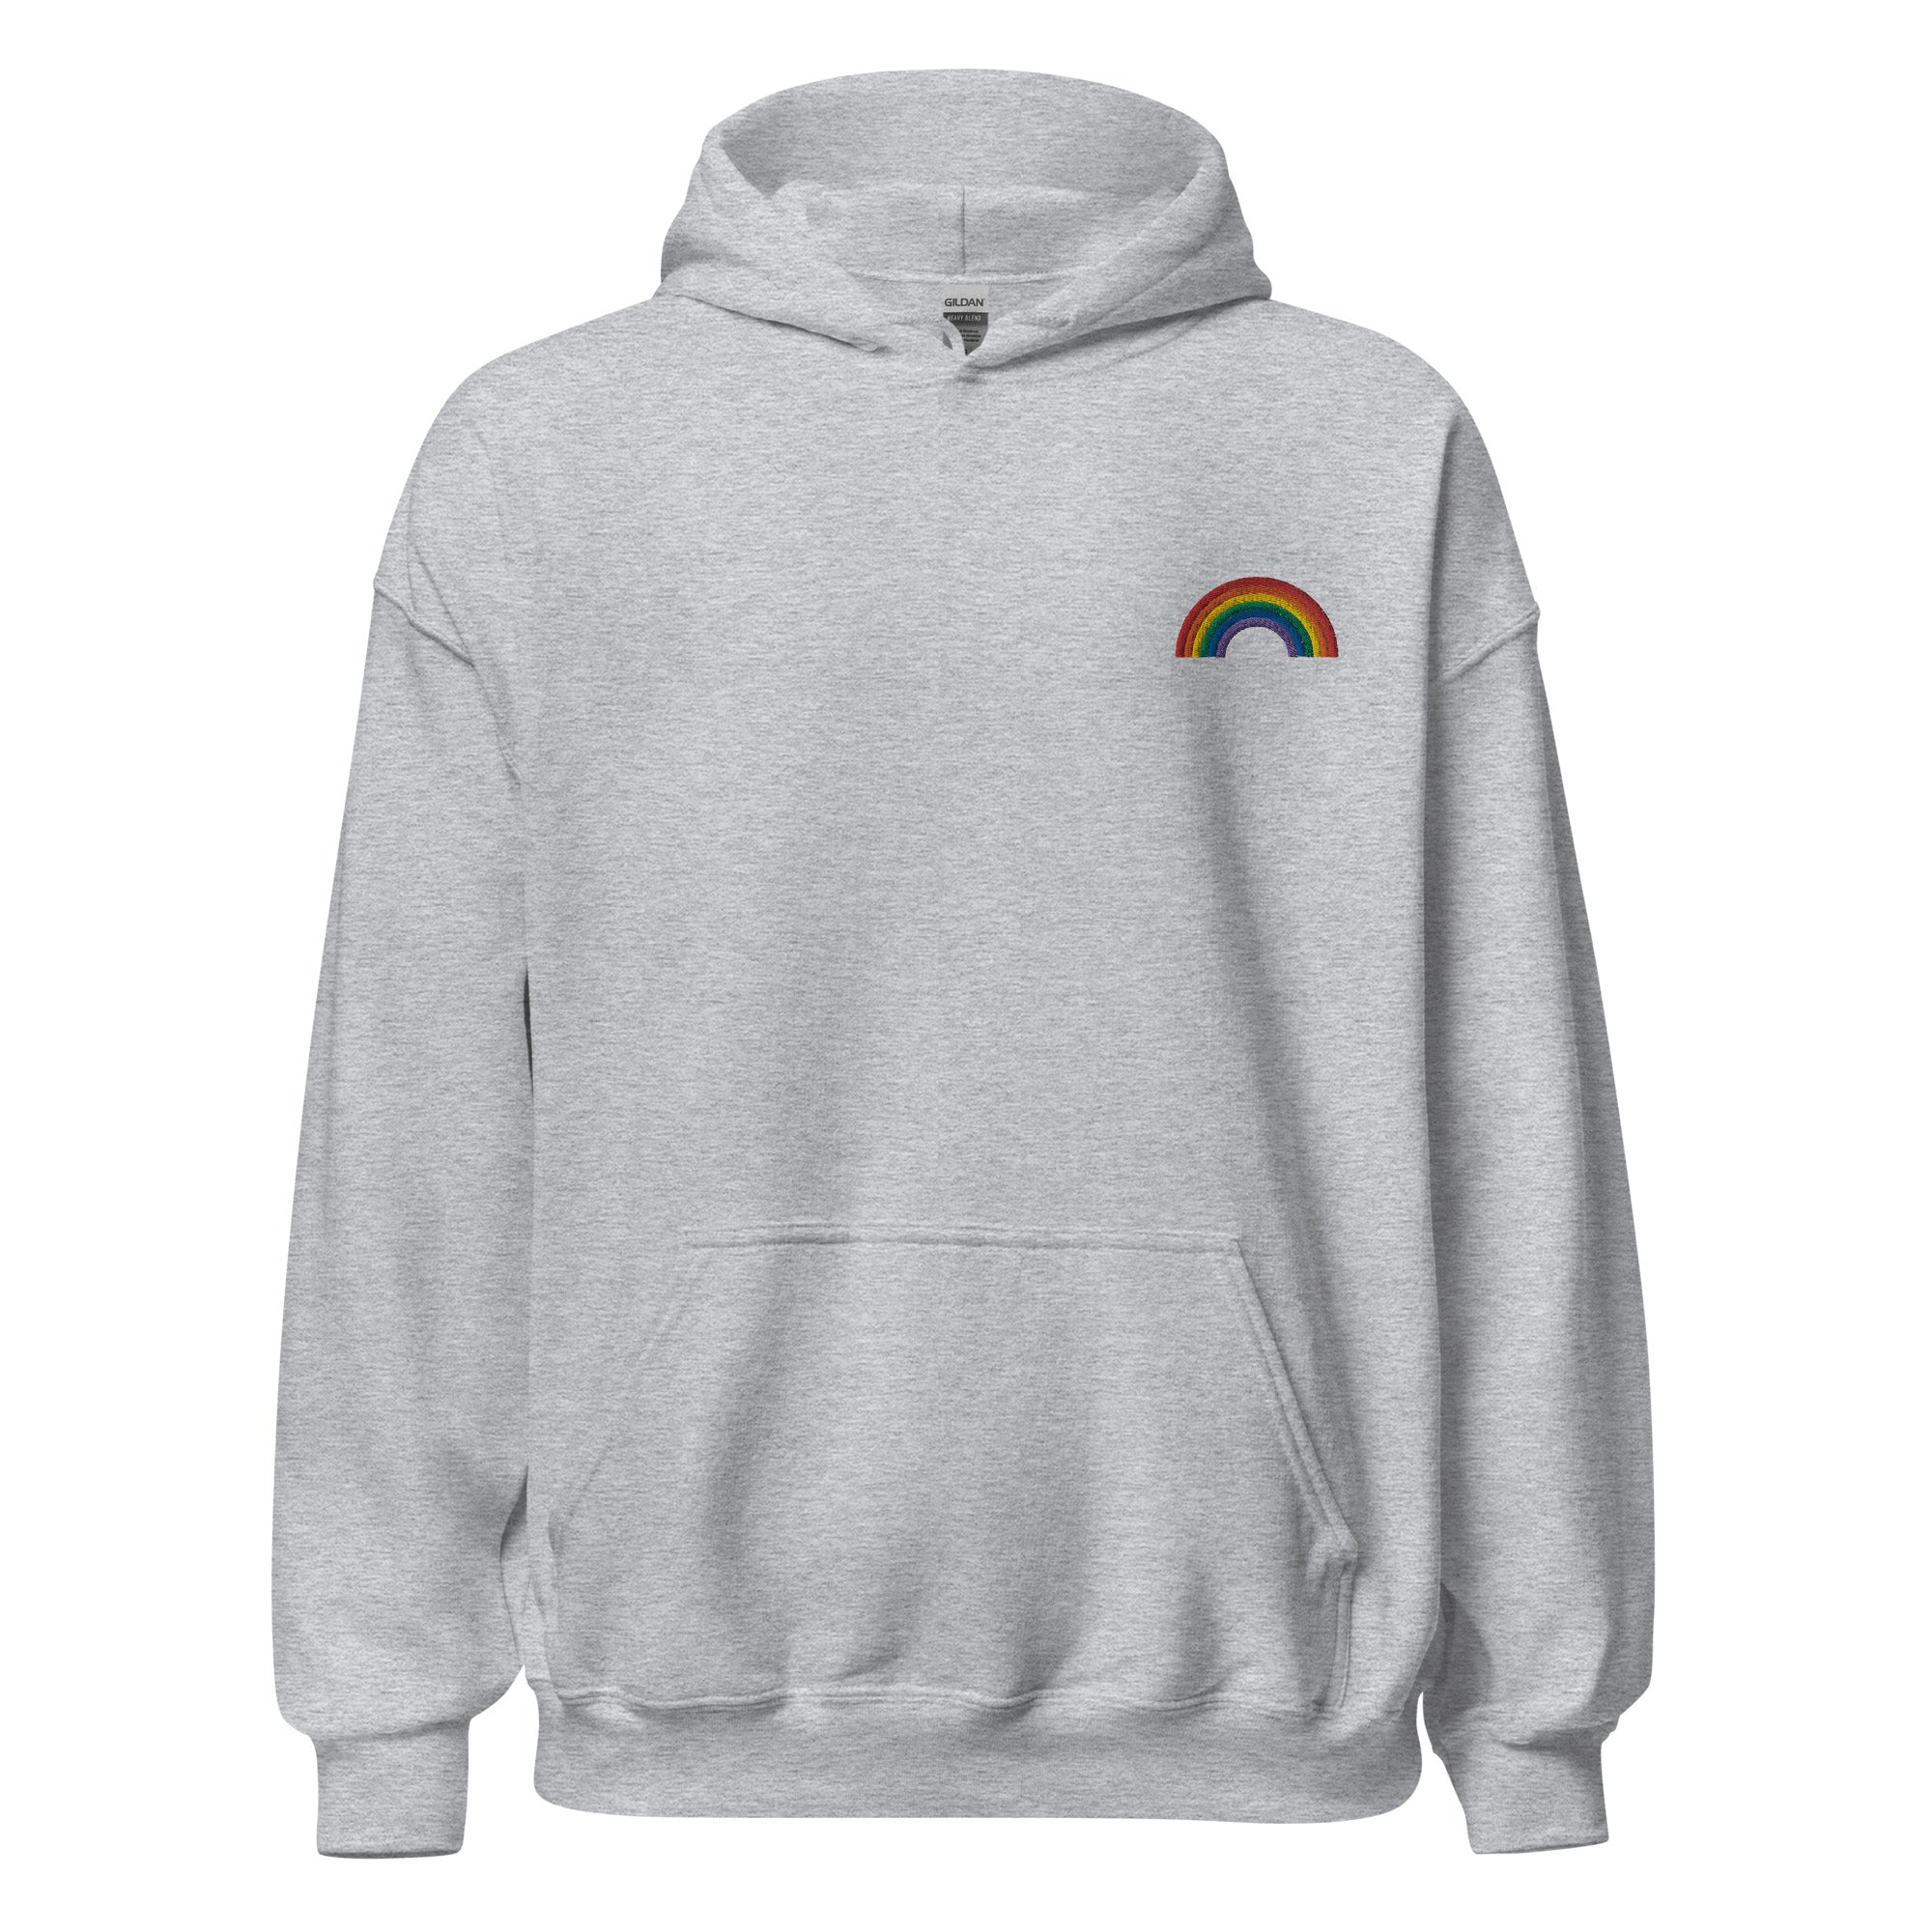 The Classic Rainbow Embroidered Unisex Hoodie